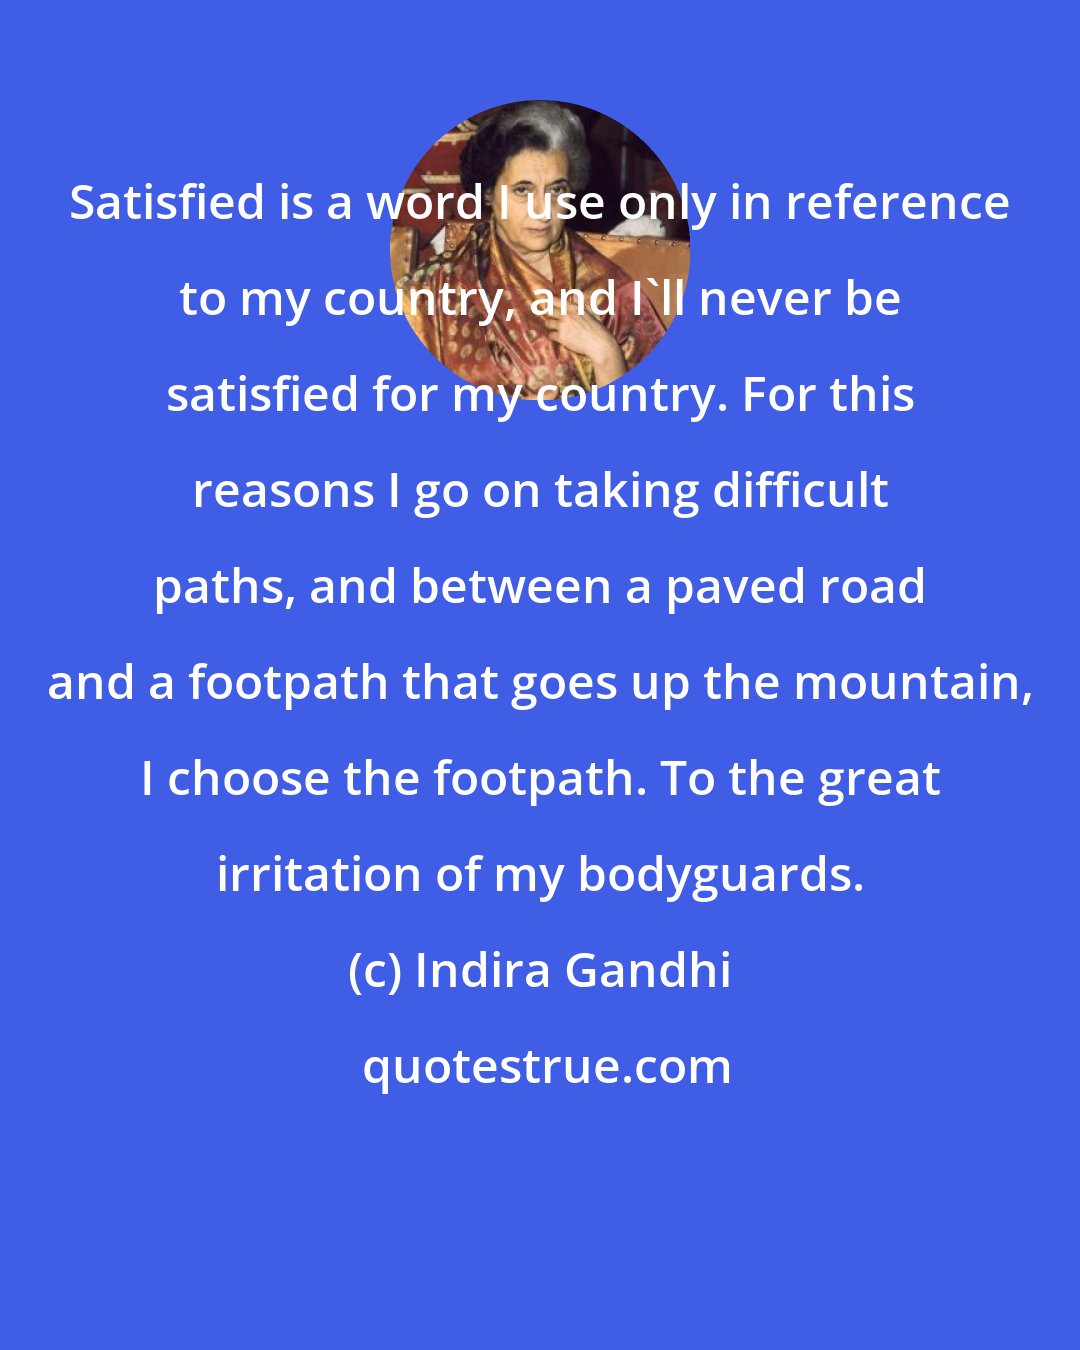 Indira Gandhi: Satisfied is a word I use only in reference to my country, and I'll never be satisfied for my country. For this reasons I go on taking difficult paths, and between a paved road and a footpath that goes up the mountain, I choose the footpath. To the great irritation of my bodyguards.